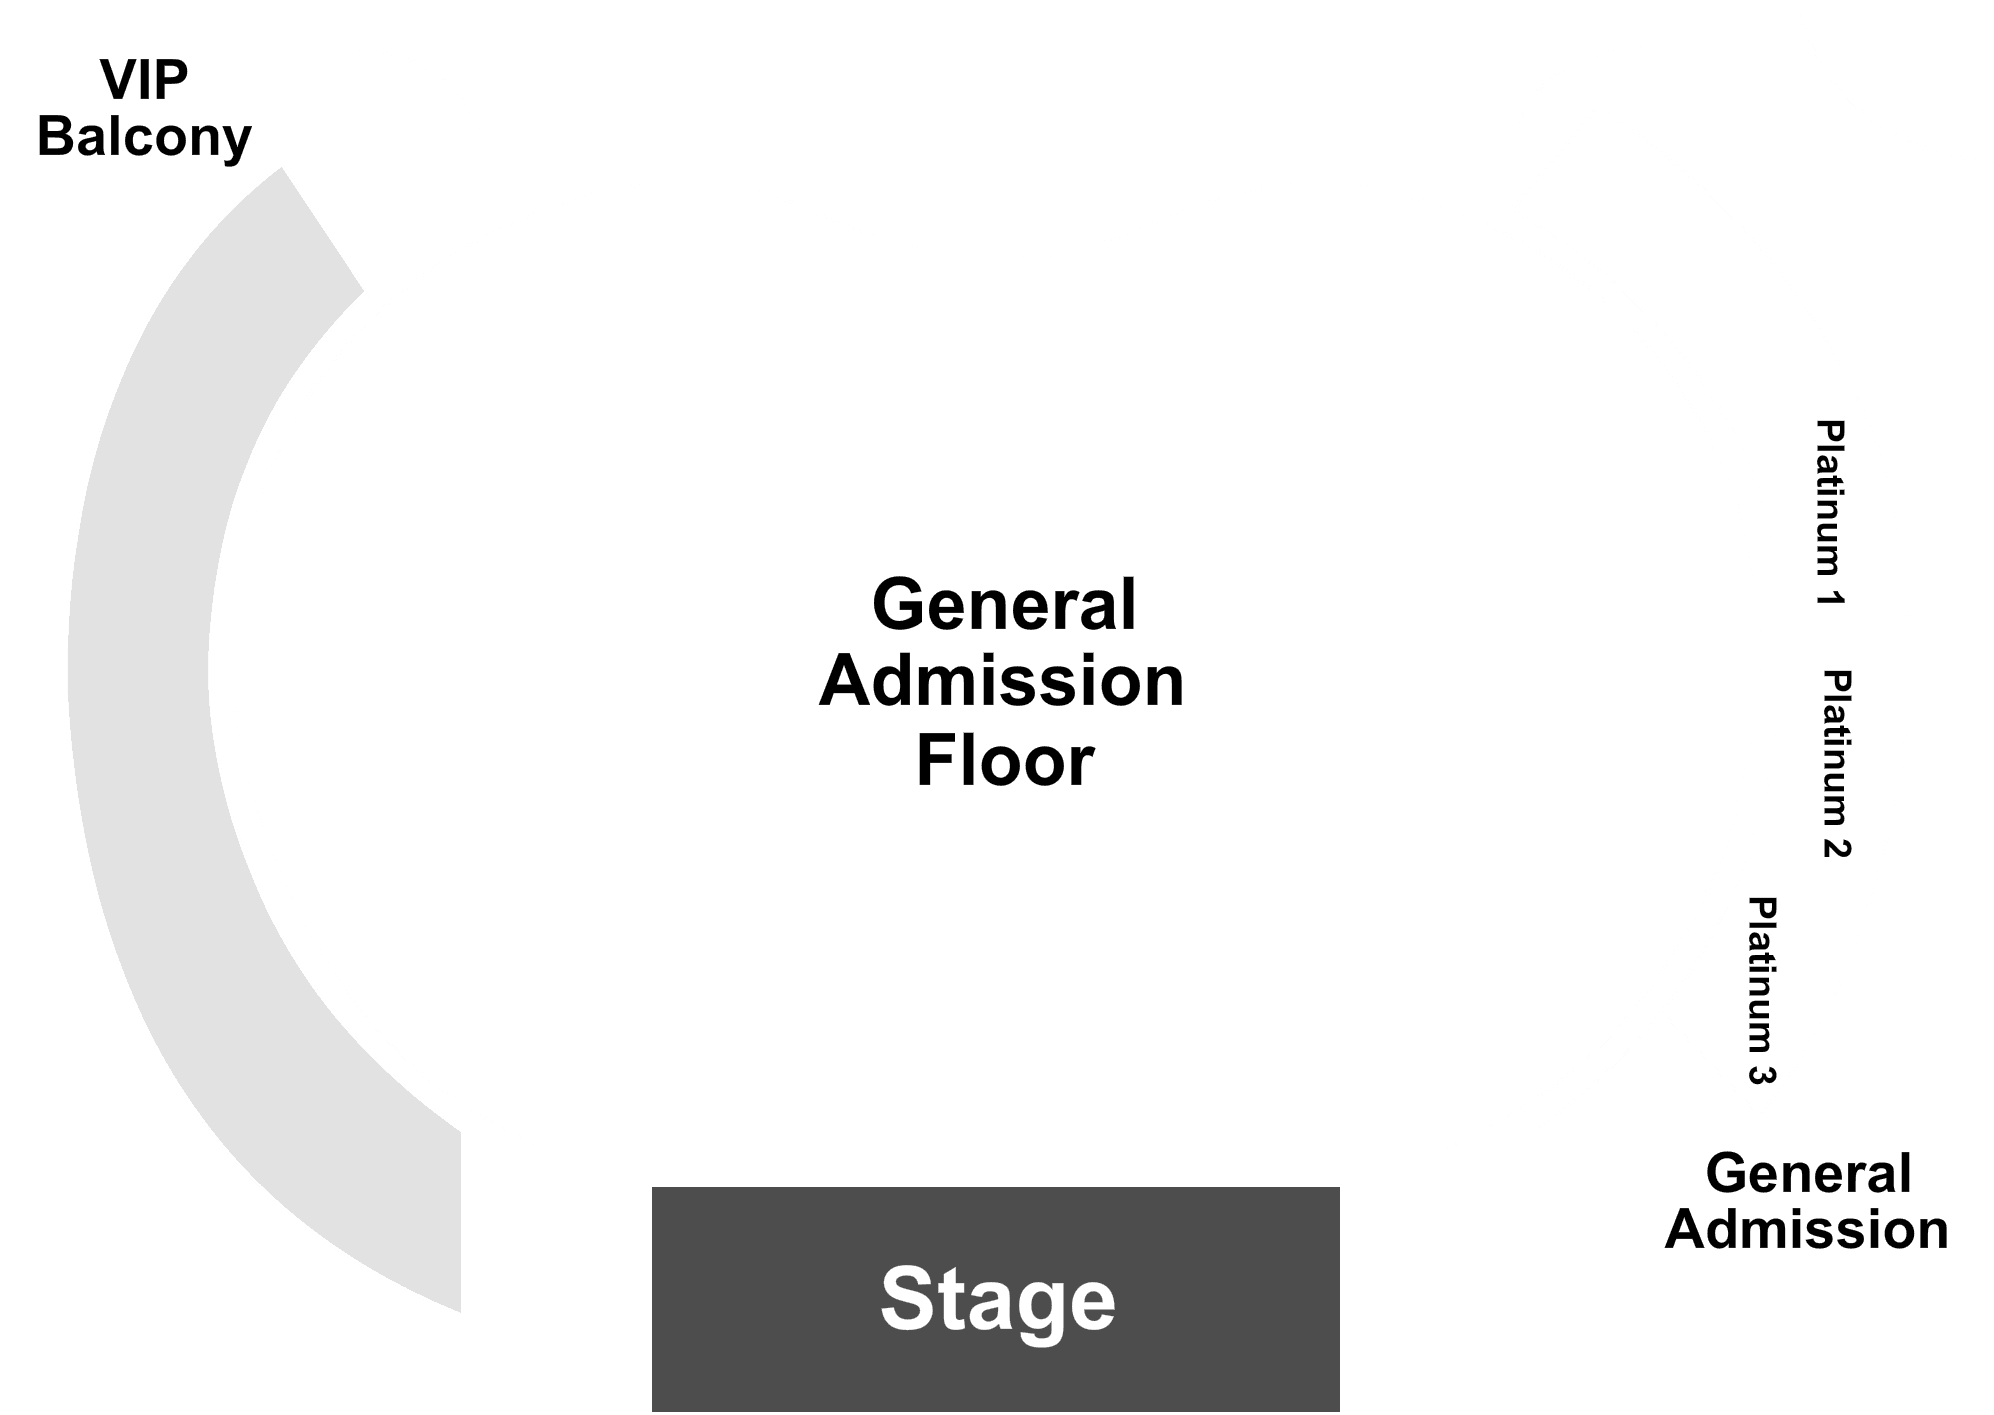 Concert Venue Seating Layout